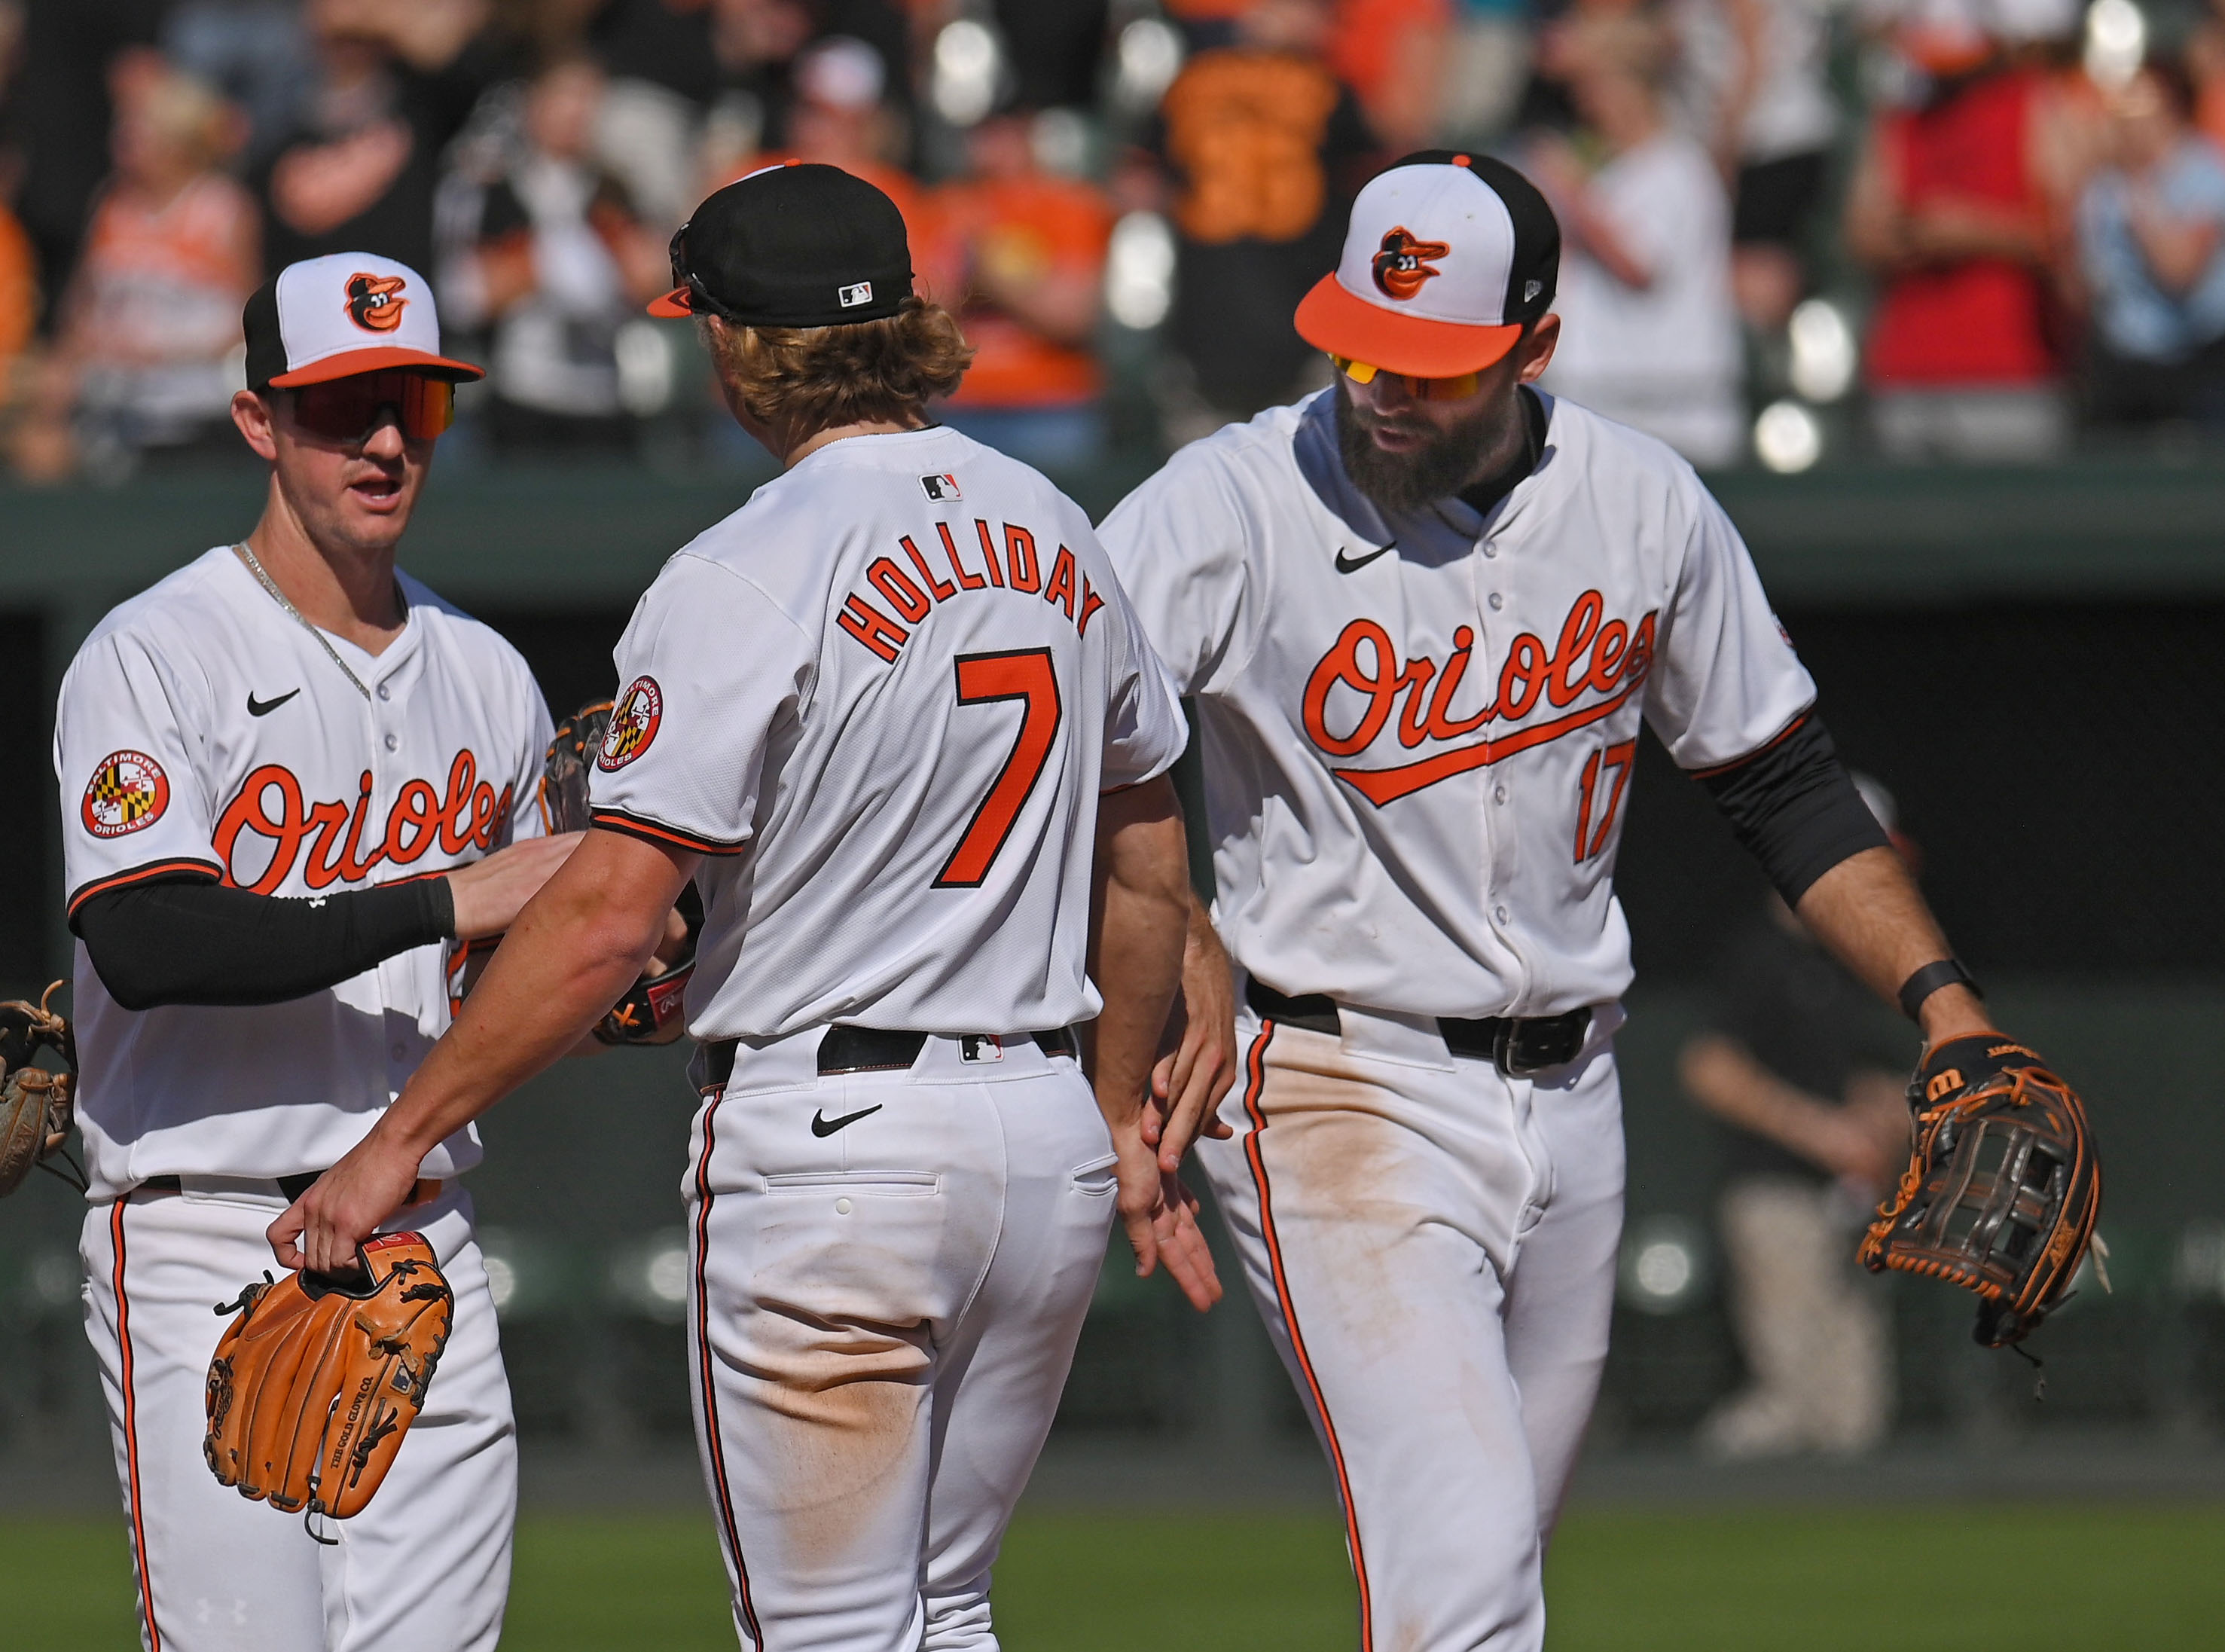 Austin Hays, from left, Jackson Holliday,and Colton Cowser celebrate Orioles' 6-4 victory over the Brewers at Oriole Park at Camden Yards. (Kenneth K. Lam/Staff)